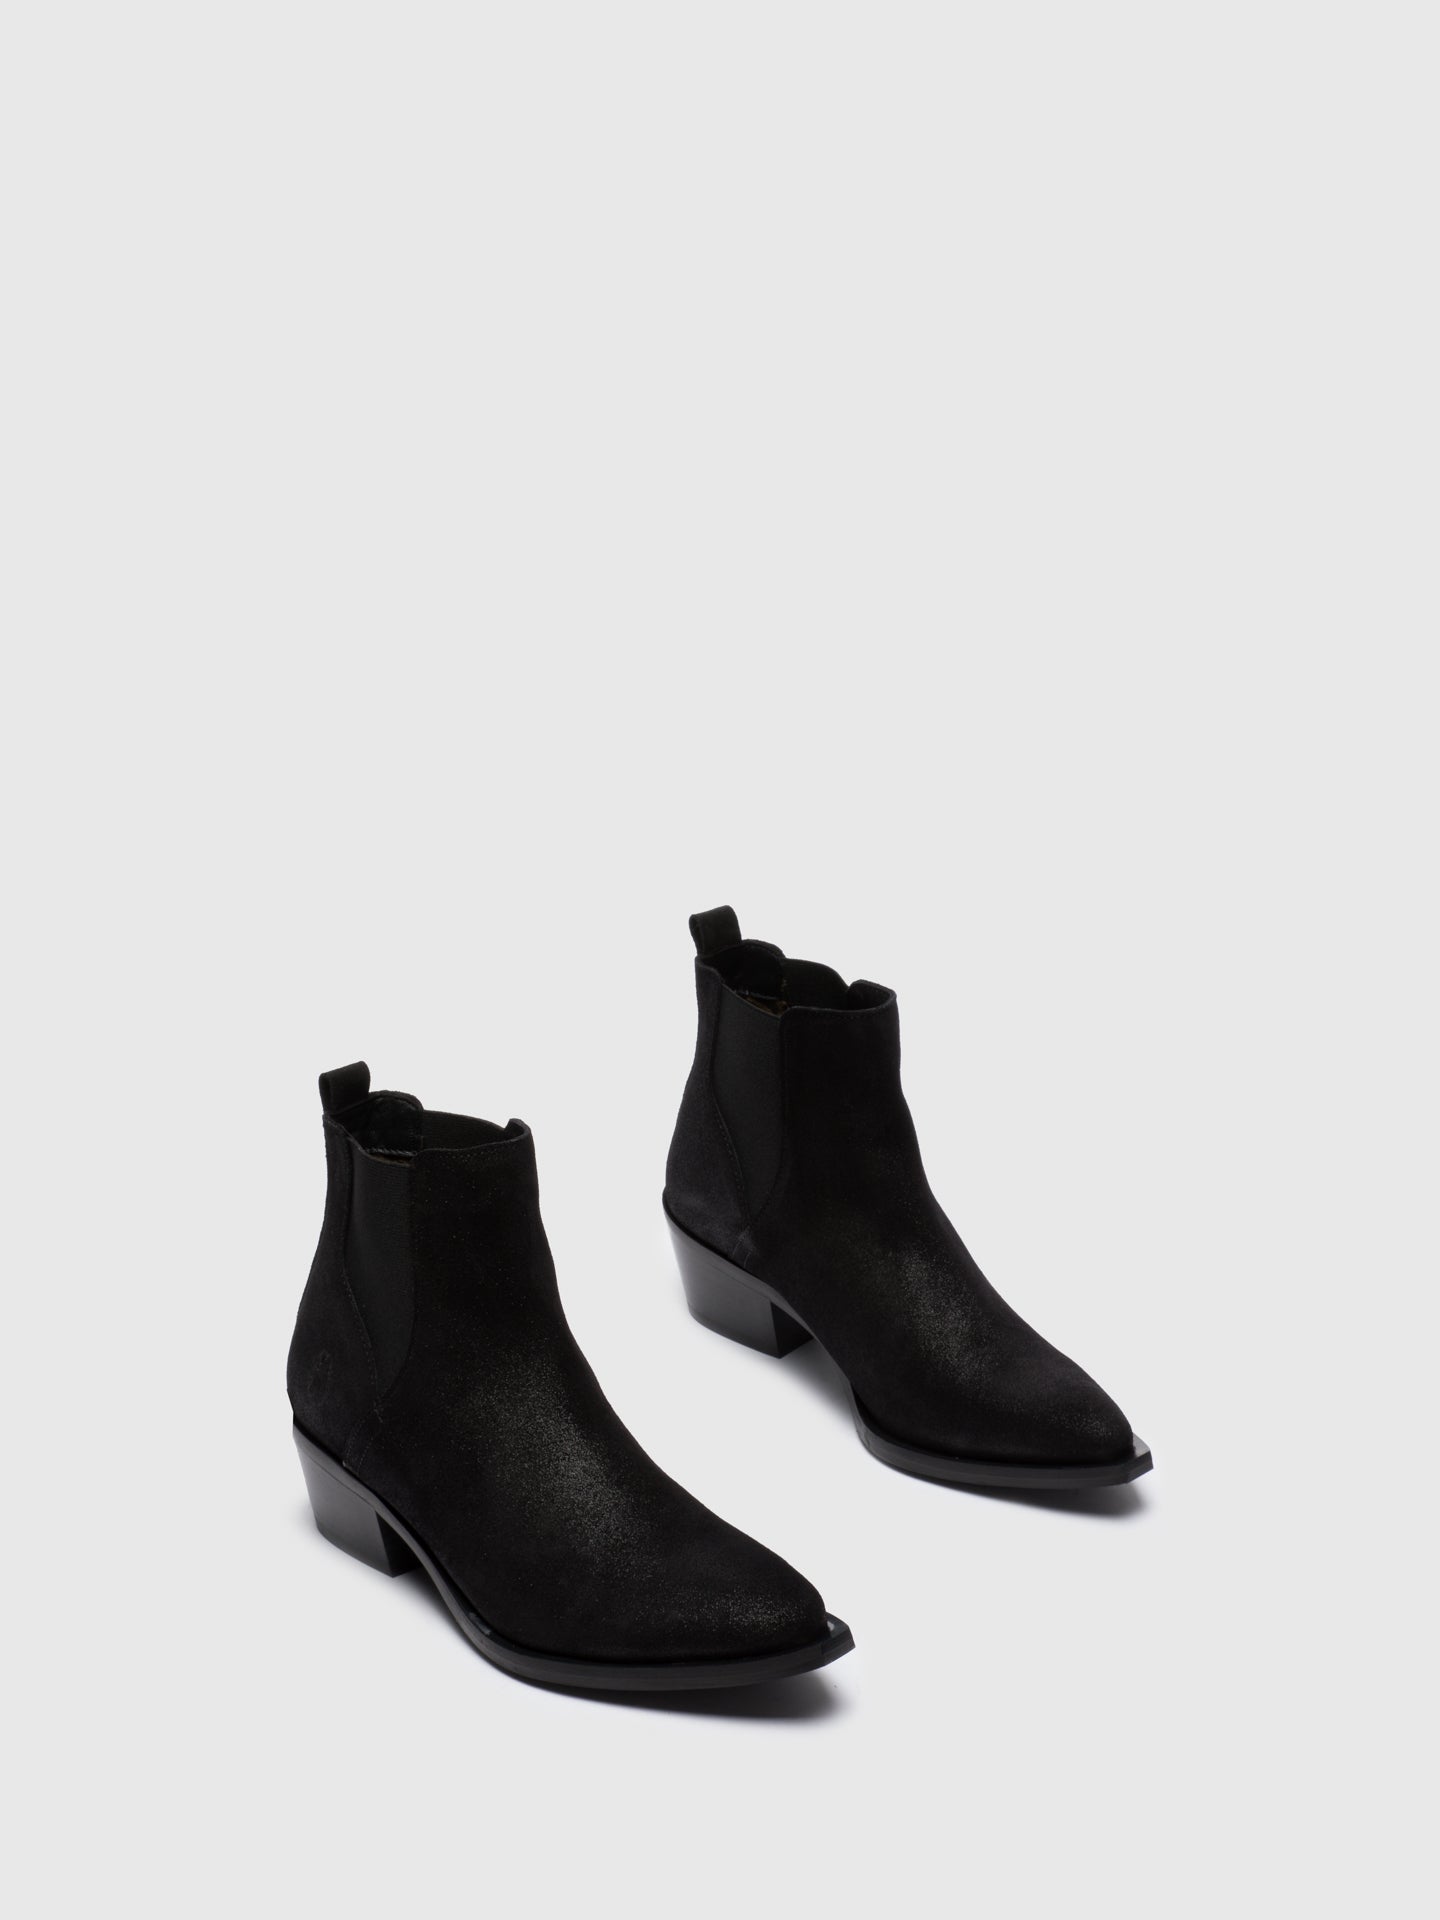 Fly London Coal Black Chelsea Ankle Boots